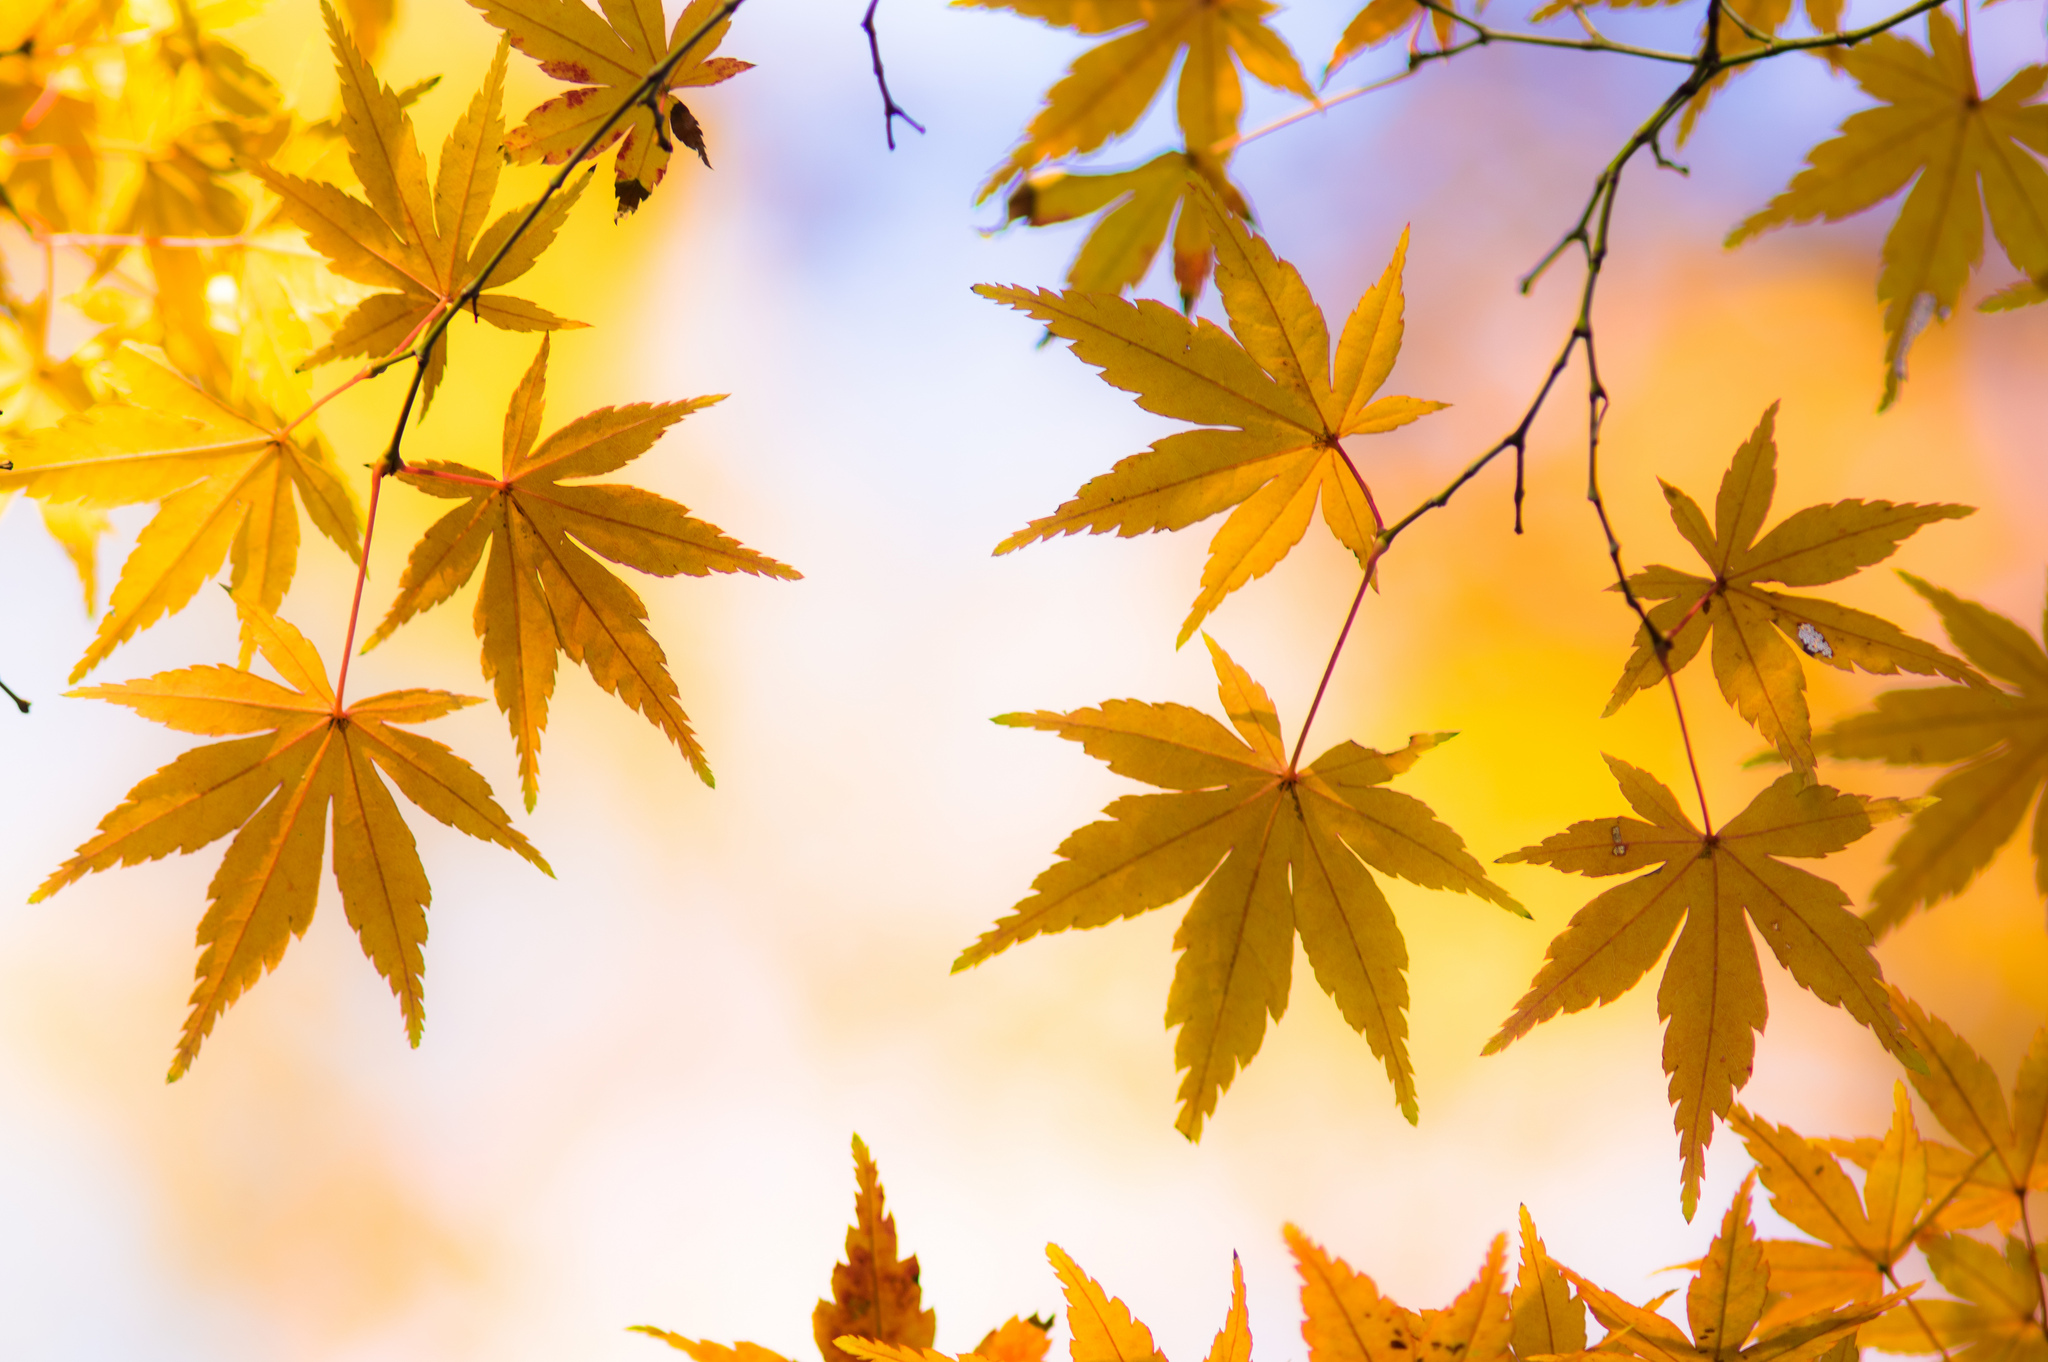 General 2048x1362 leaves nature macro colorful Japanese maple